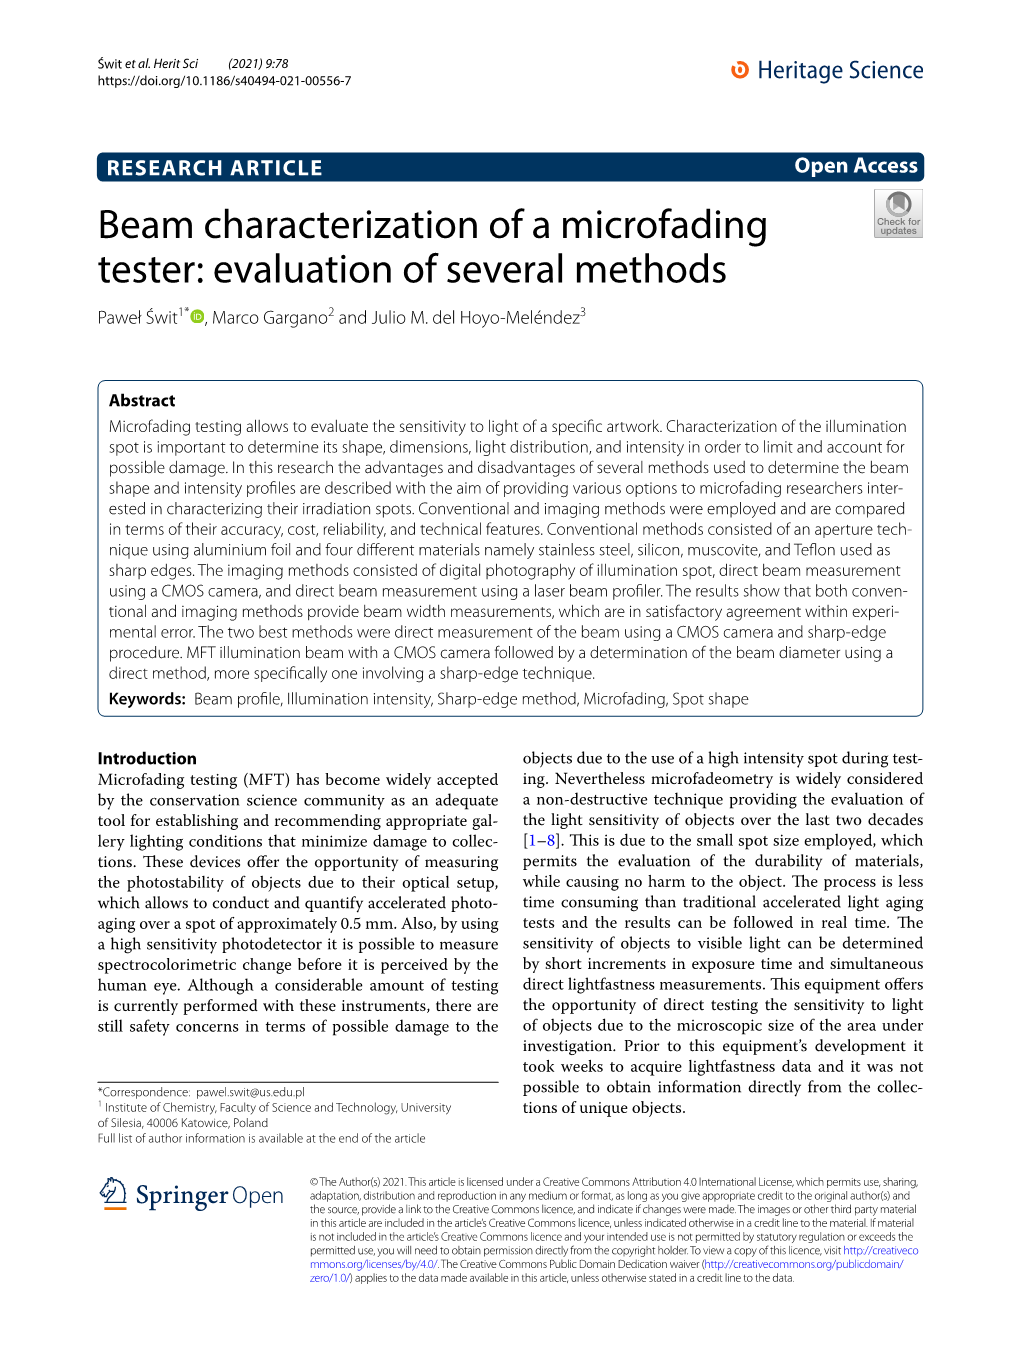 Beam Characterization of a Microfading Tester: Evaluation of Several Methods Paweł Świt1* , Marco Gargano2 and Julio M